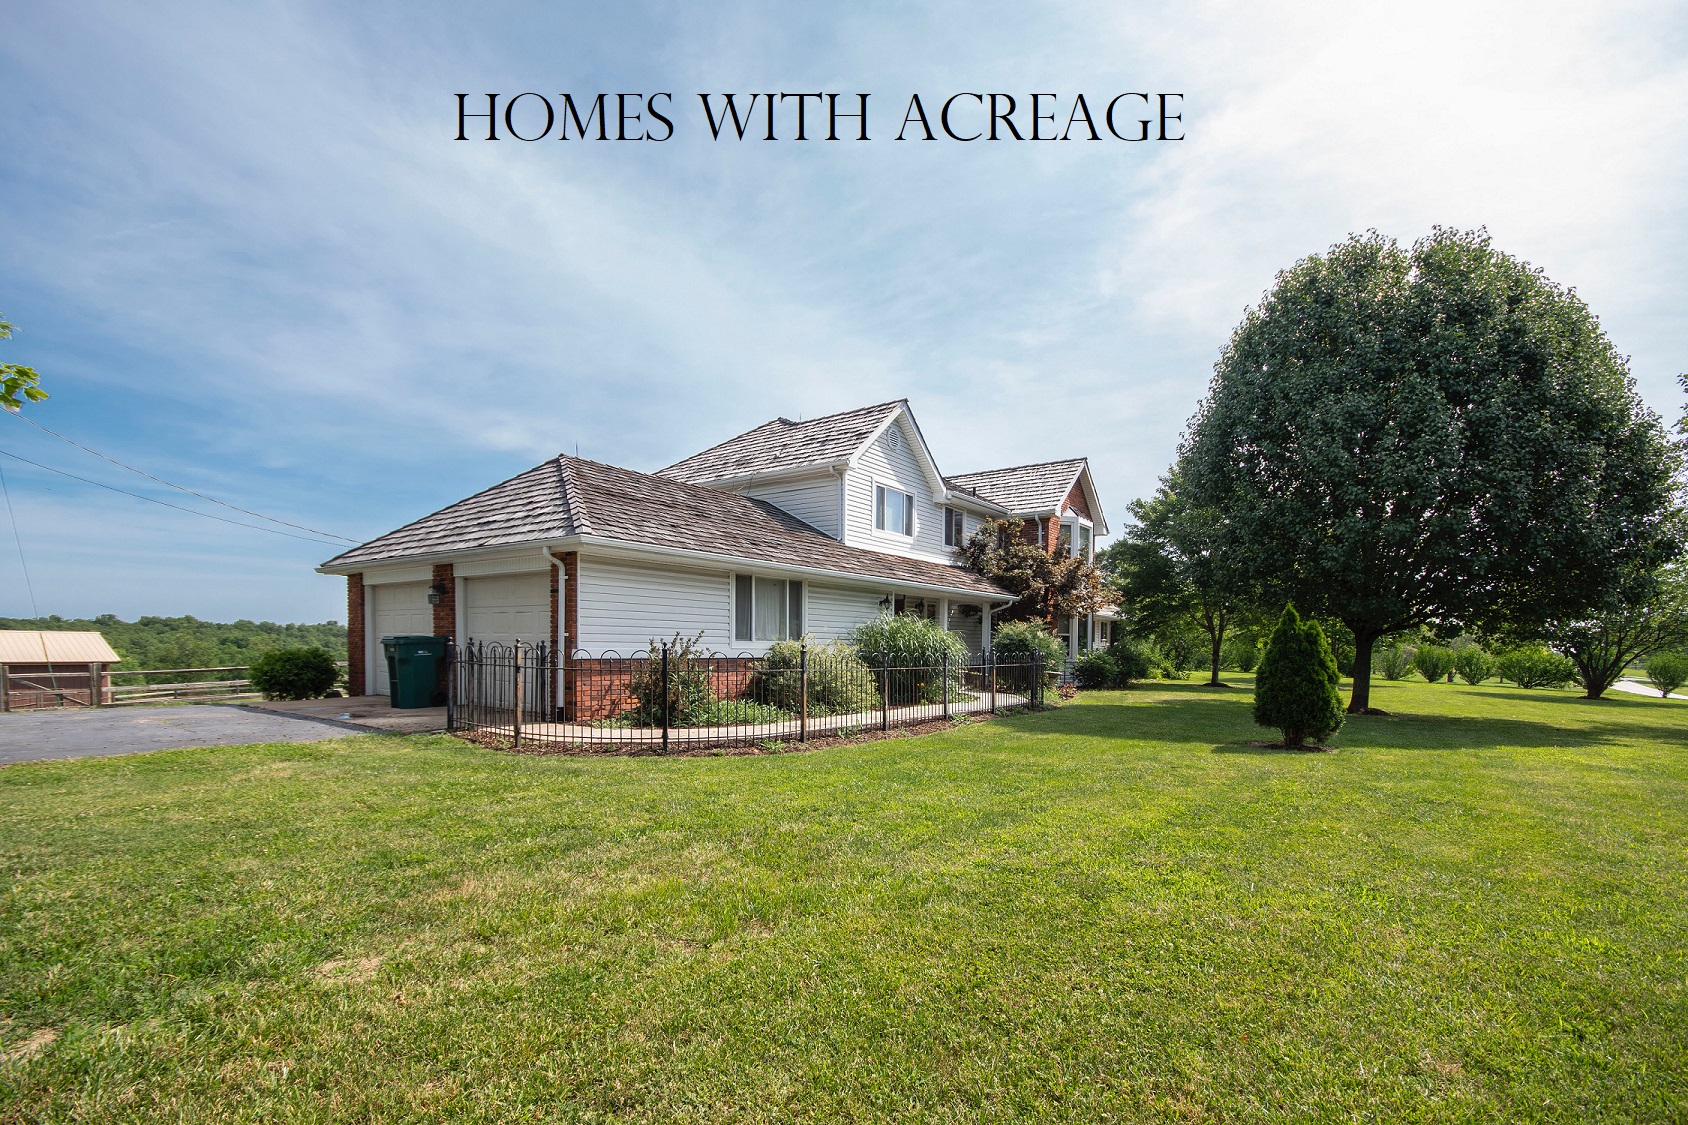 Homes with Acreage